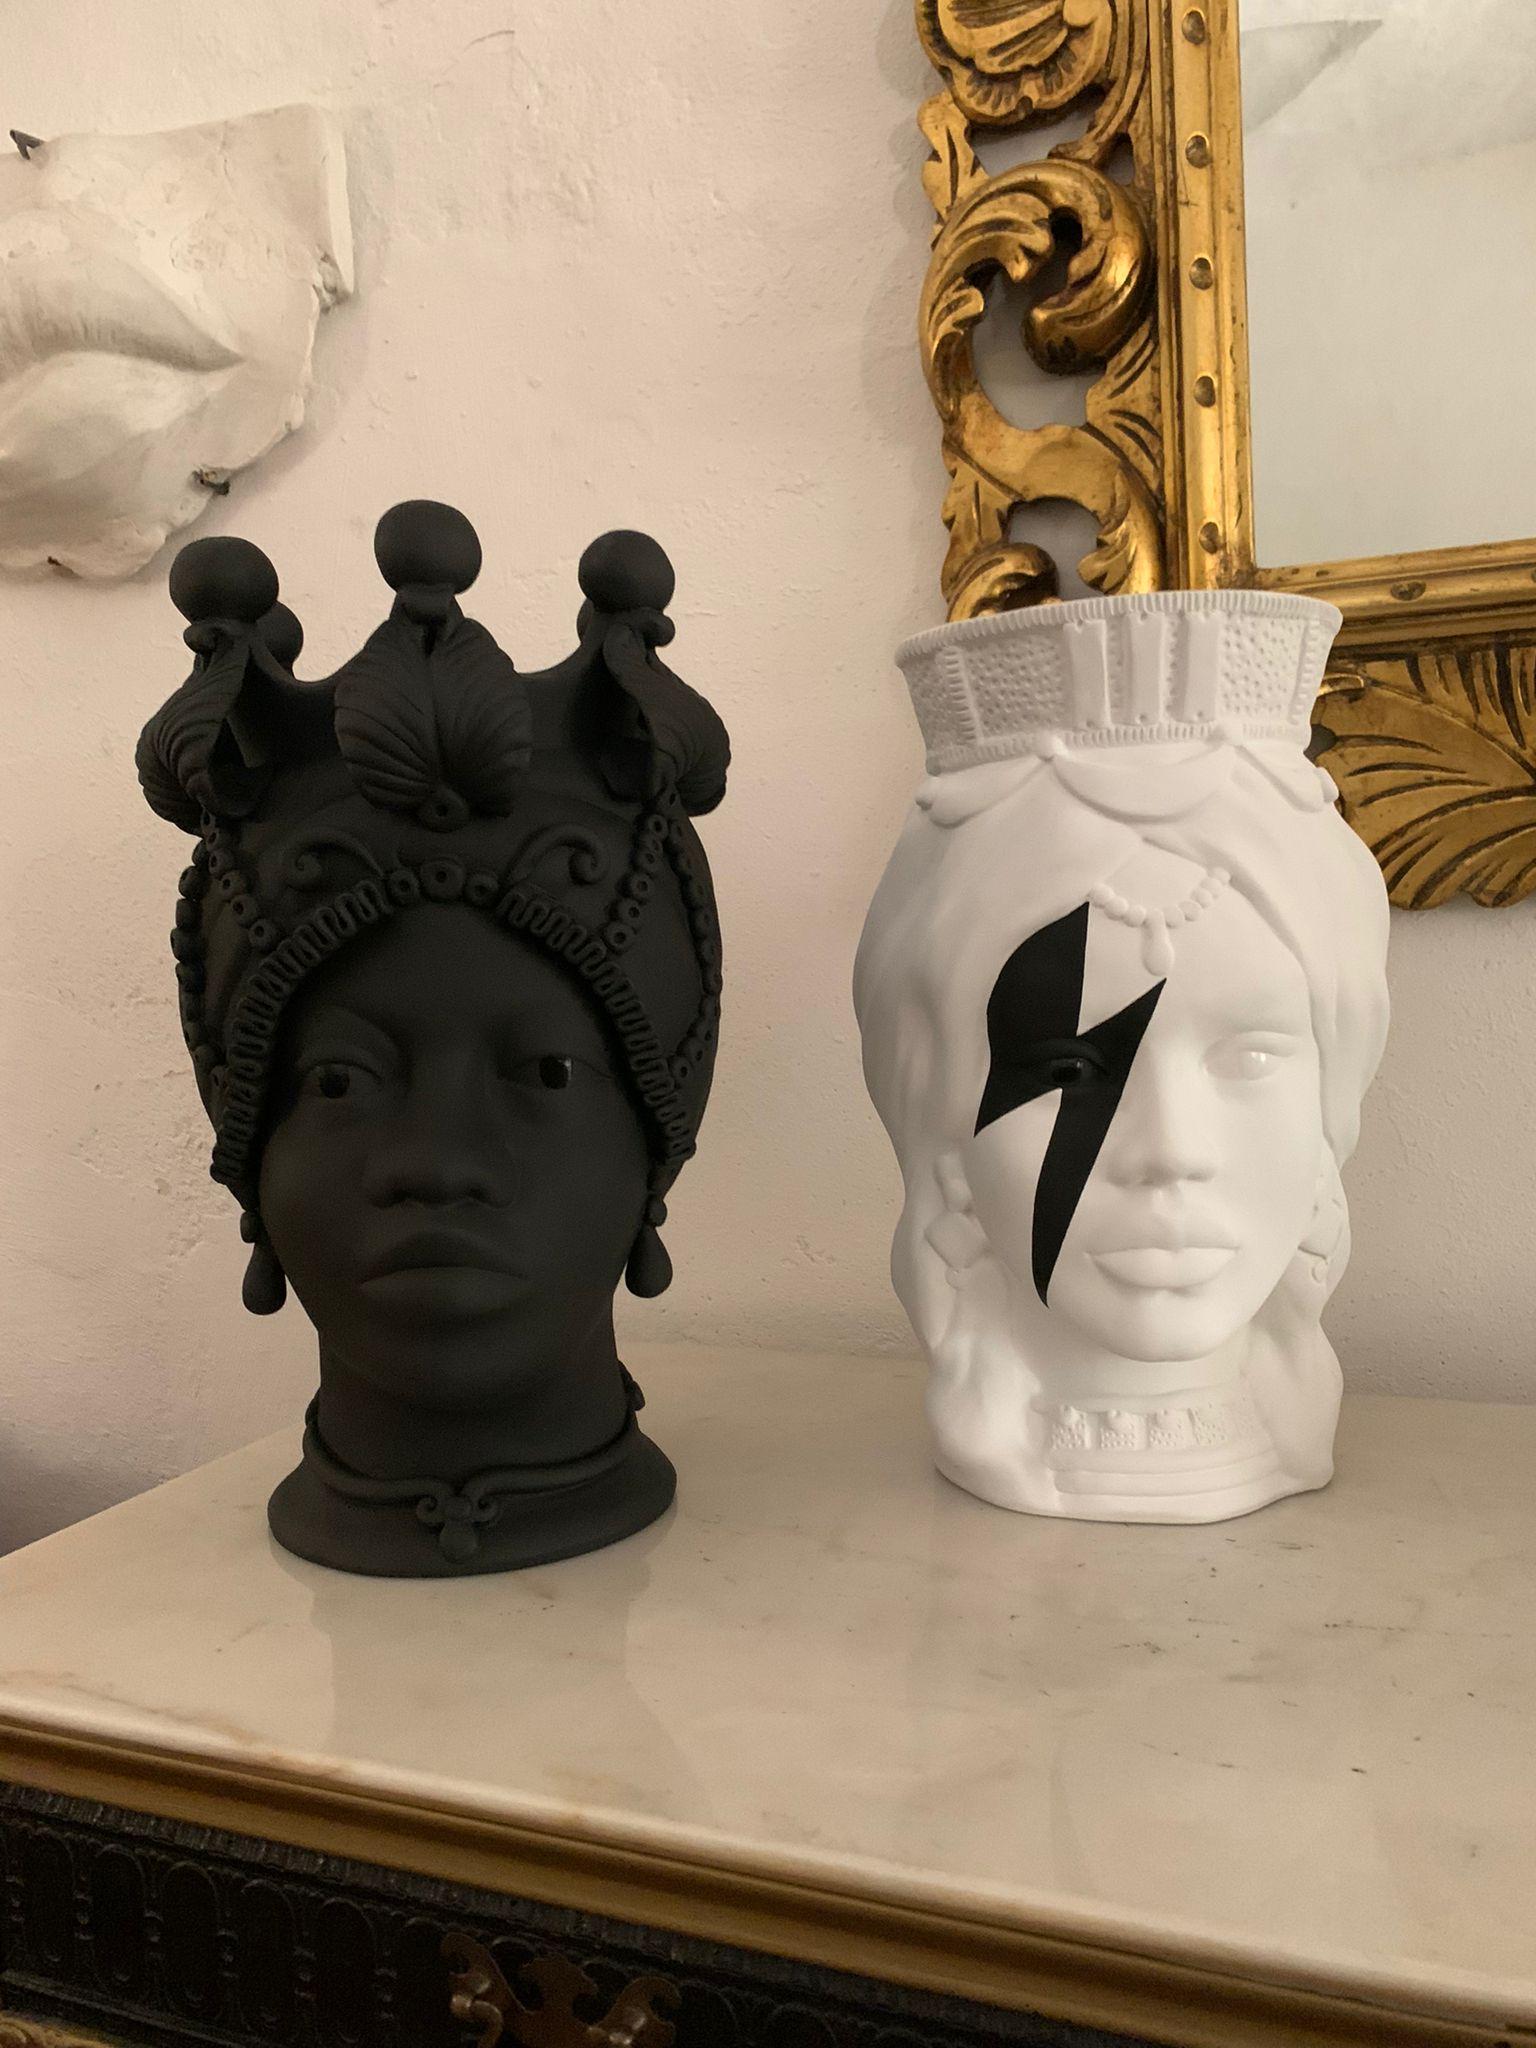 This collection is a work of art that make a statement in modern décor and in the modern cultural art world. It can be used as a vase containing flowers, or as a beautiful centerpiece or home décor object.

Its design is inspired by the